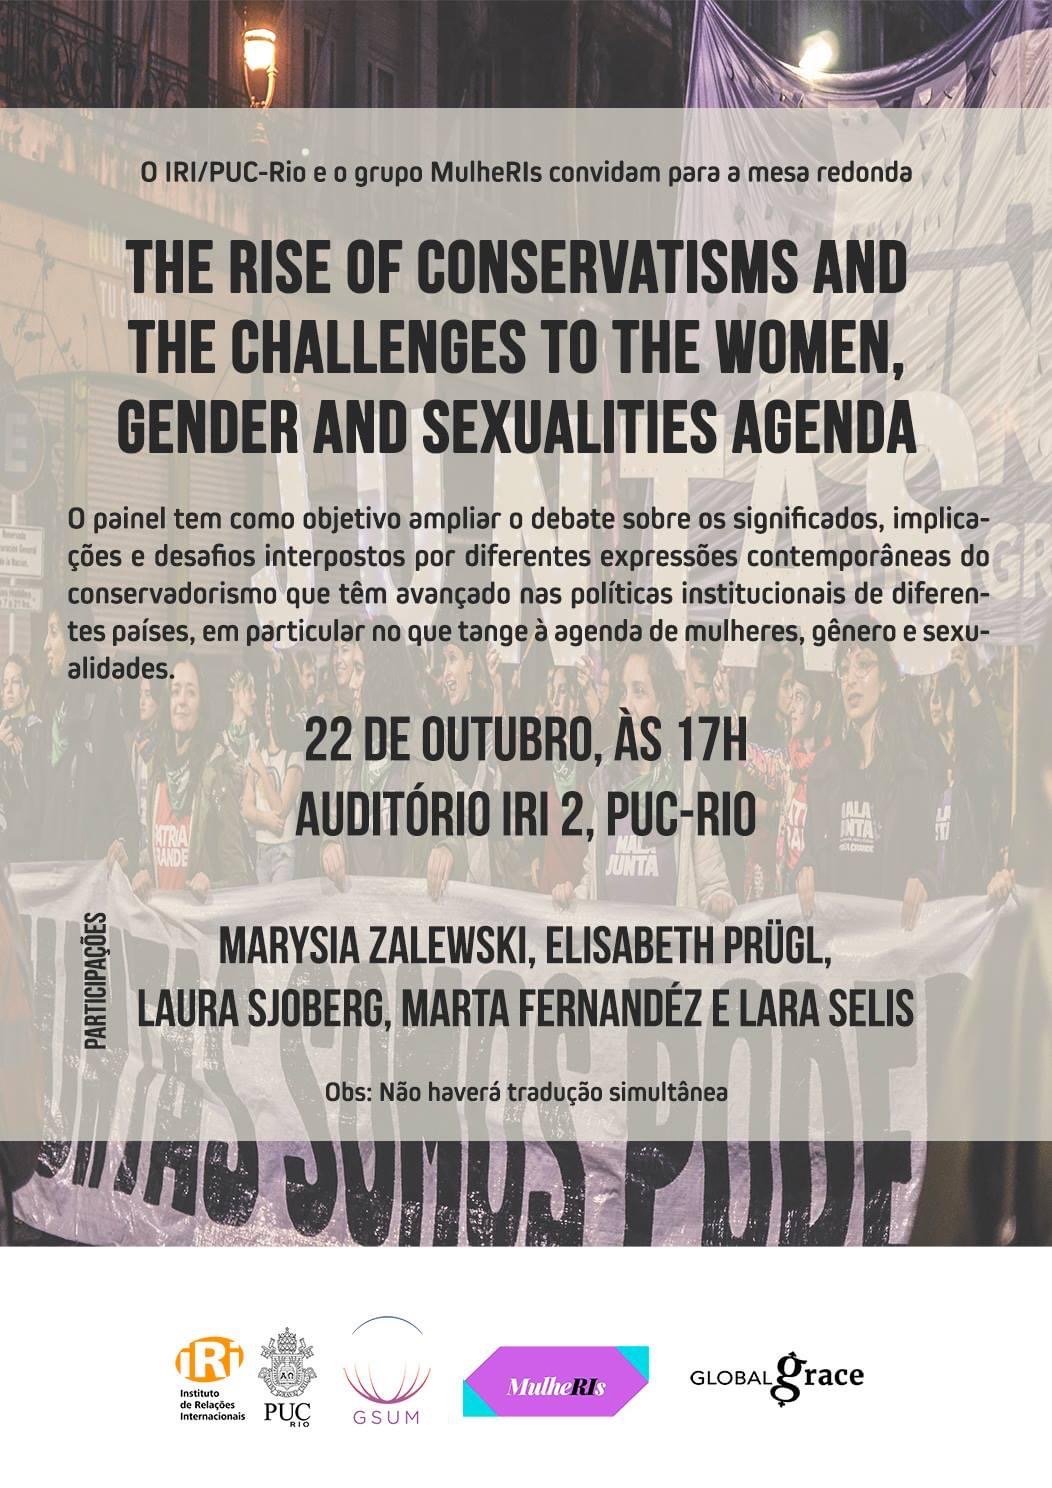 The Rise of Conservatisms and the Challenges to the Women, Gender and Sexualities Agenda